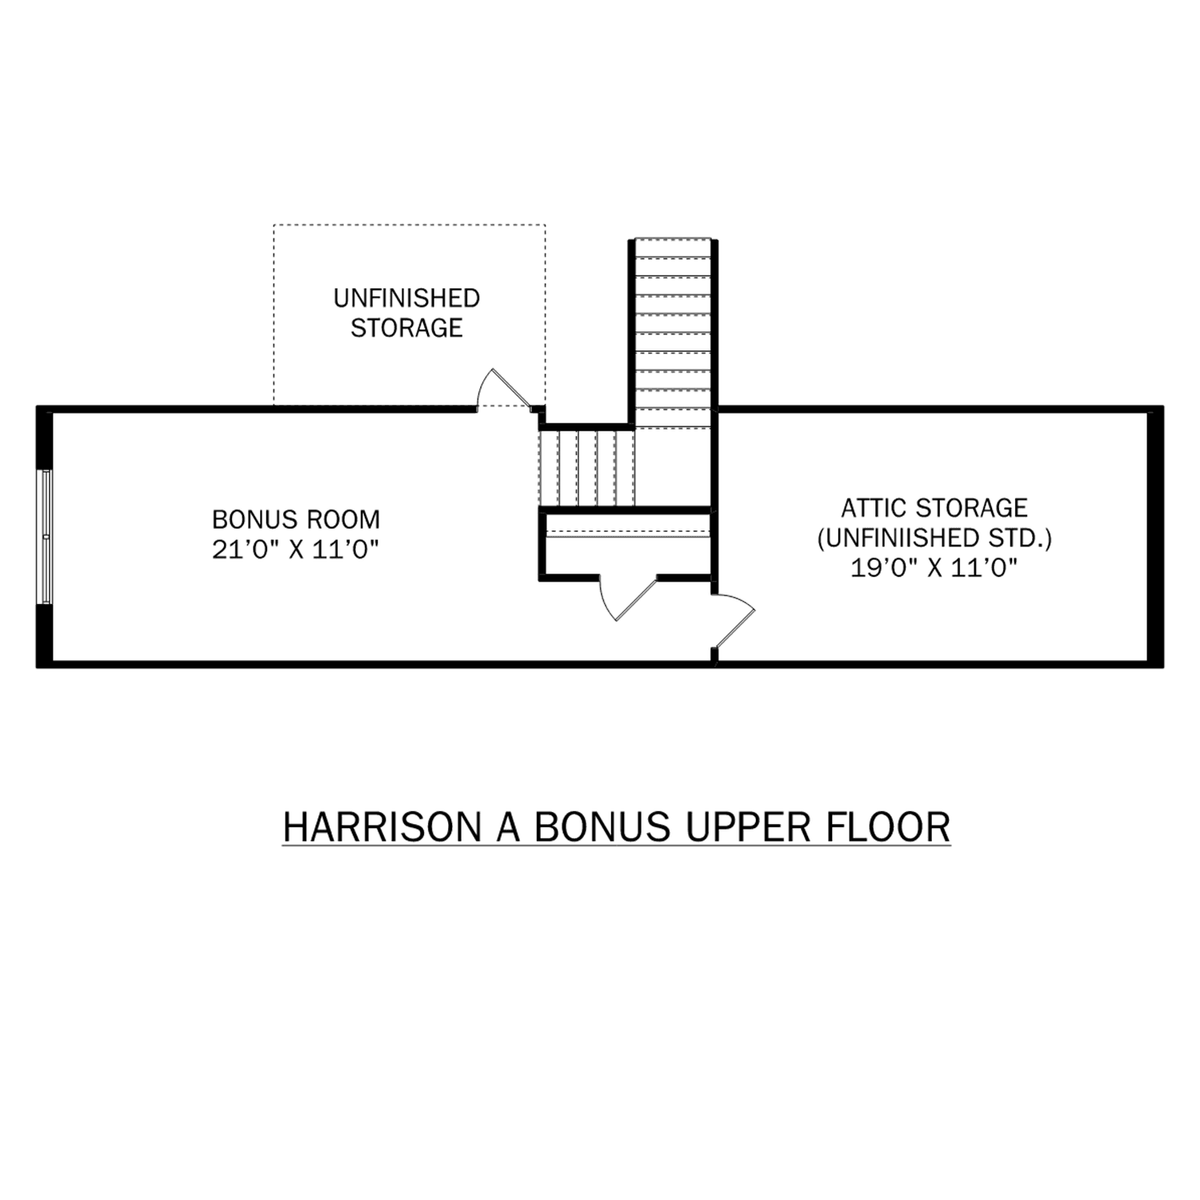 2 - The Harrison with Bonus buildable floor plan layout in Davidson Homes' River Road Estates community.